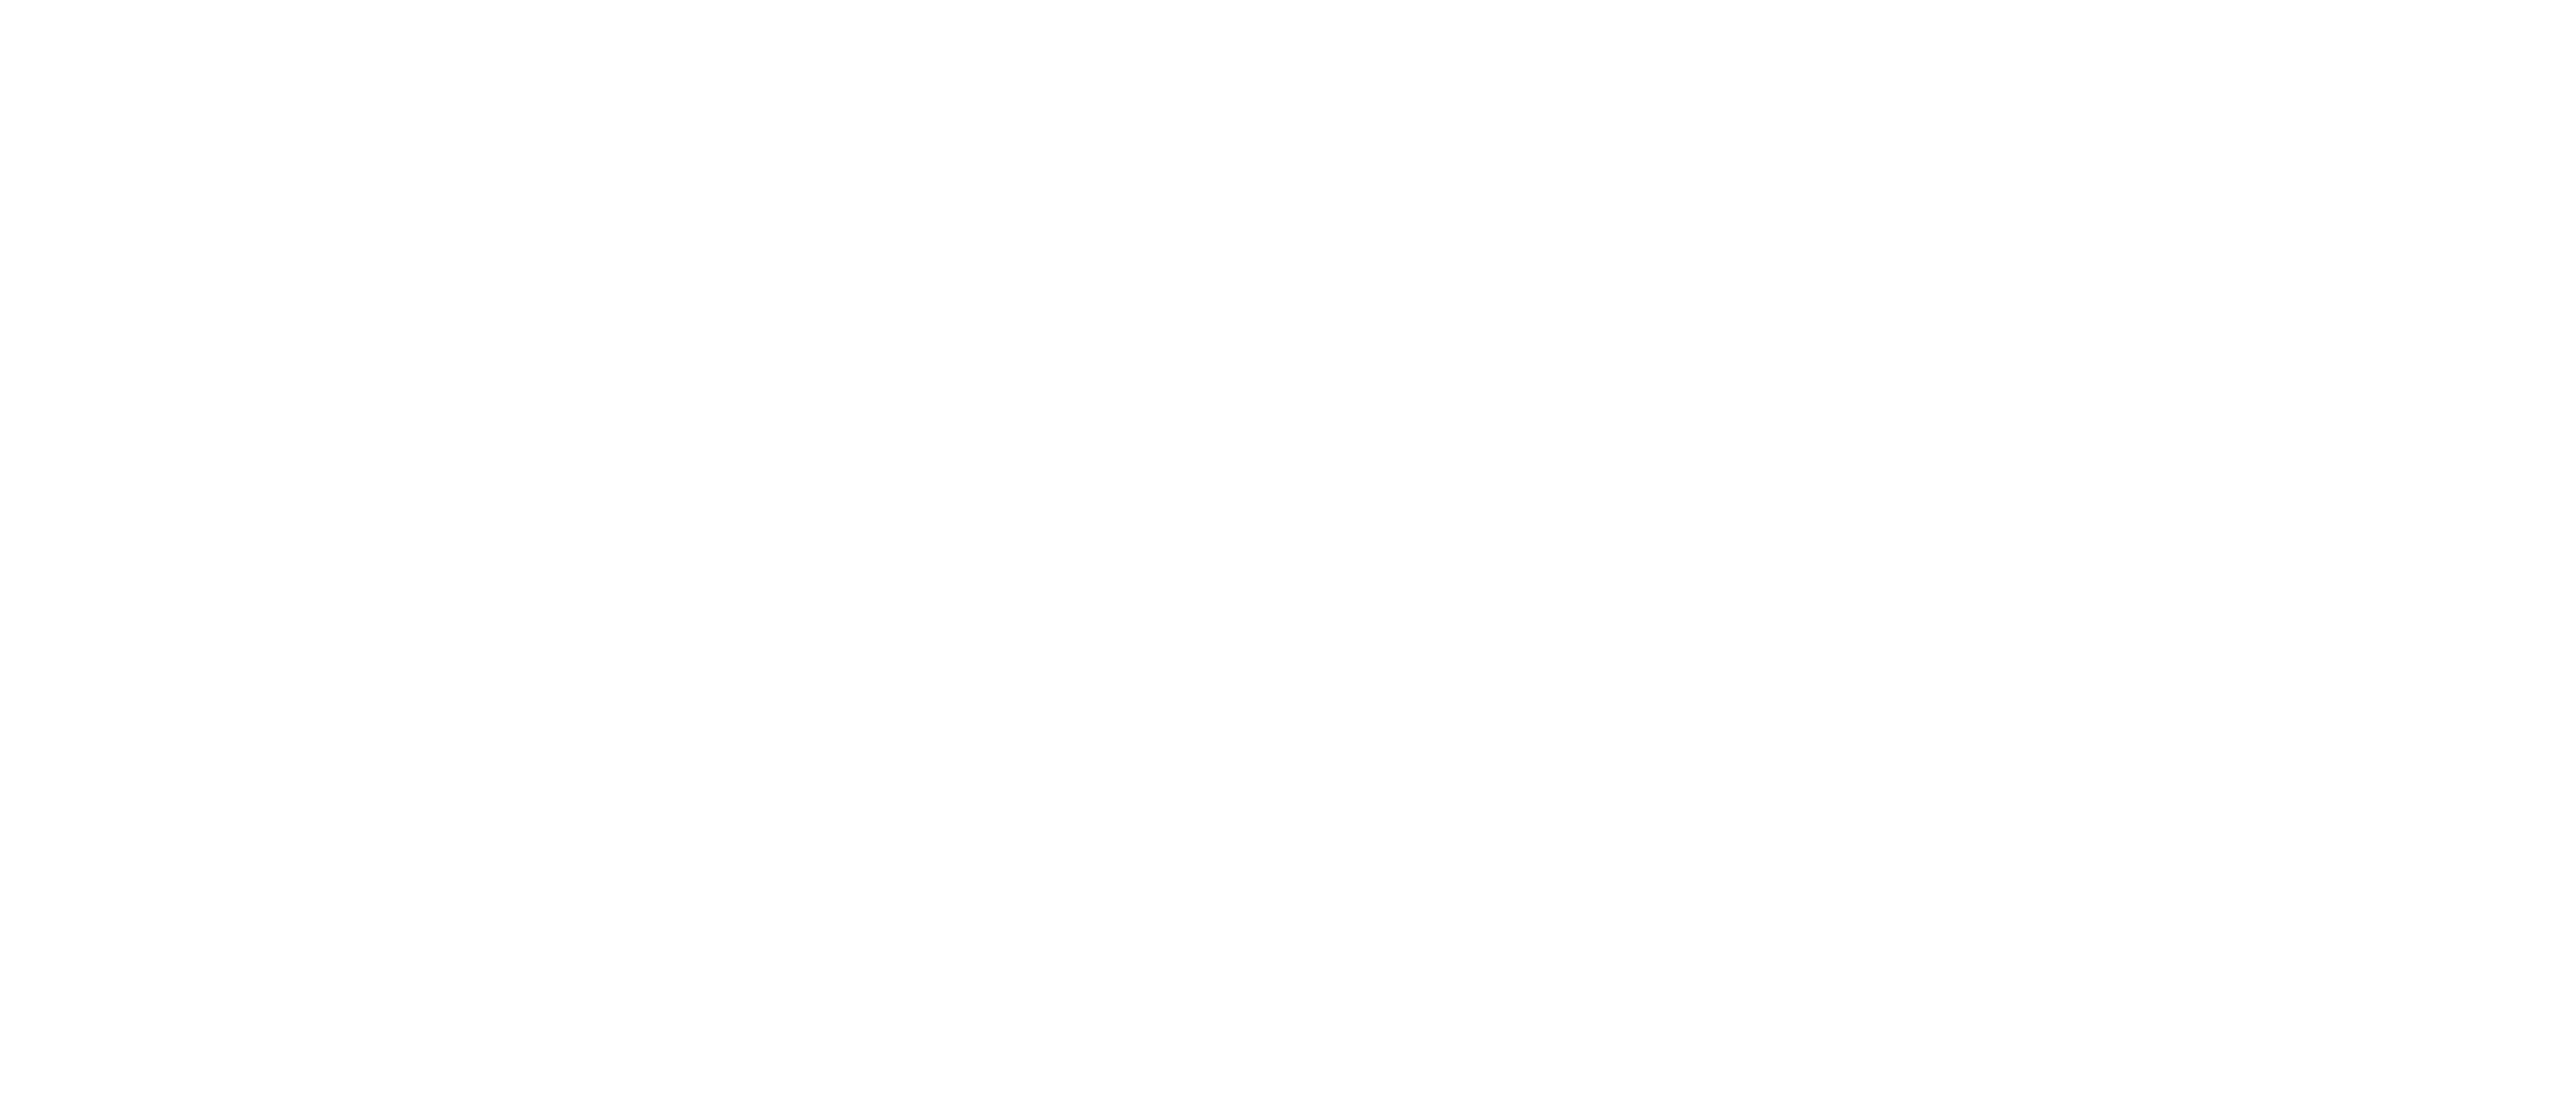 1% For The Planet Logo